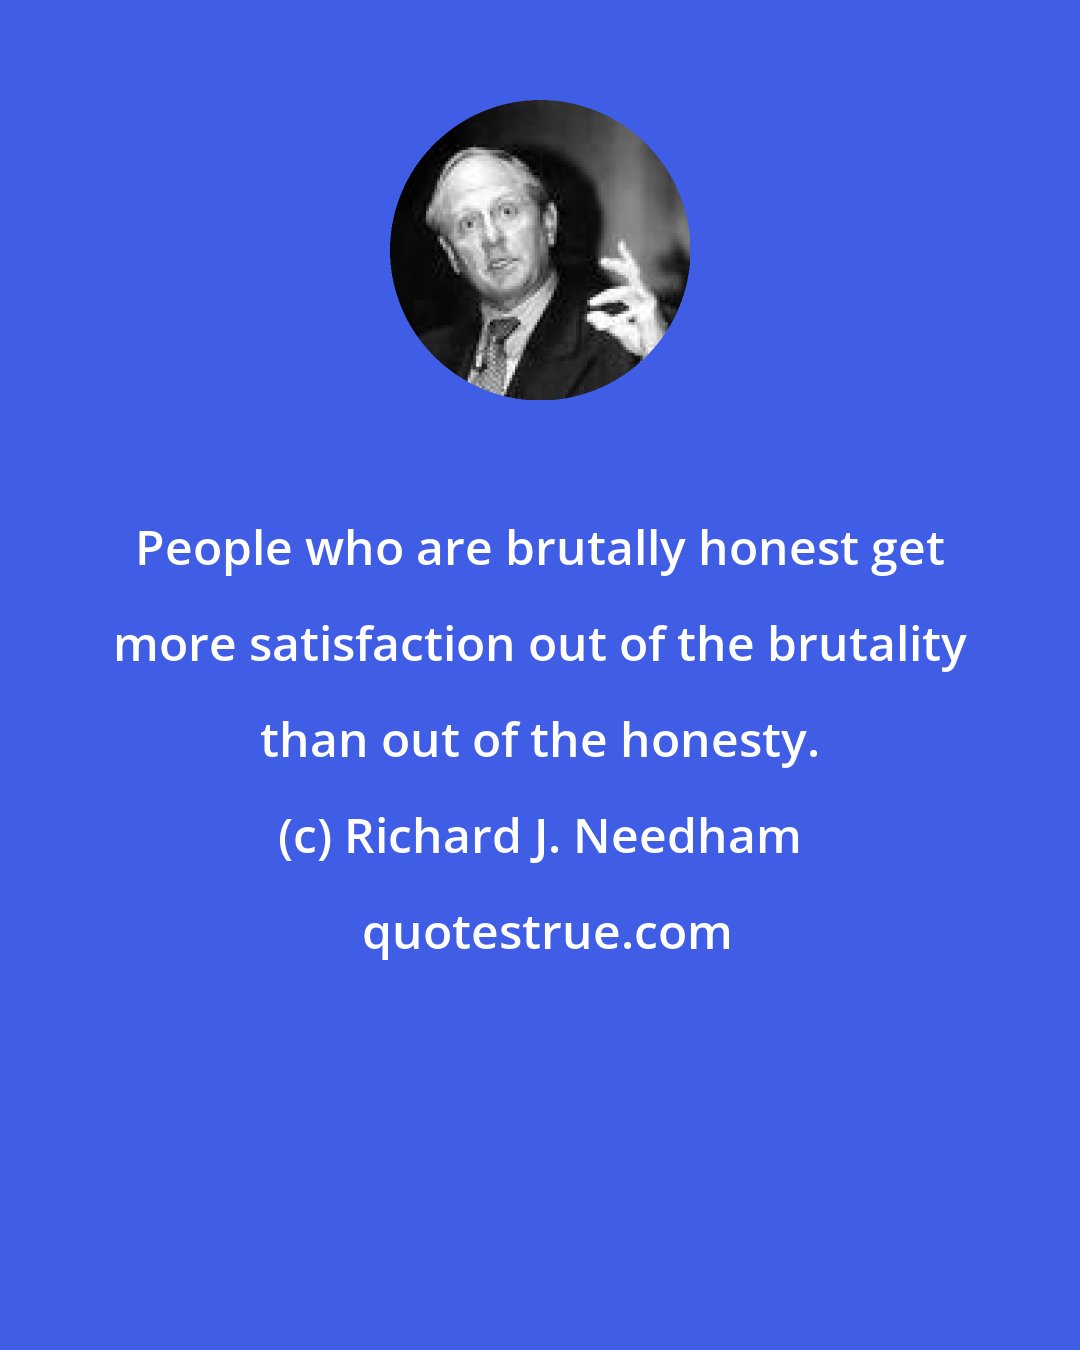 Richard J. Needham: People who are brutally honest get more satisfaction out of the brutality than out of the honesty.